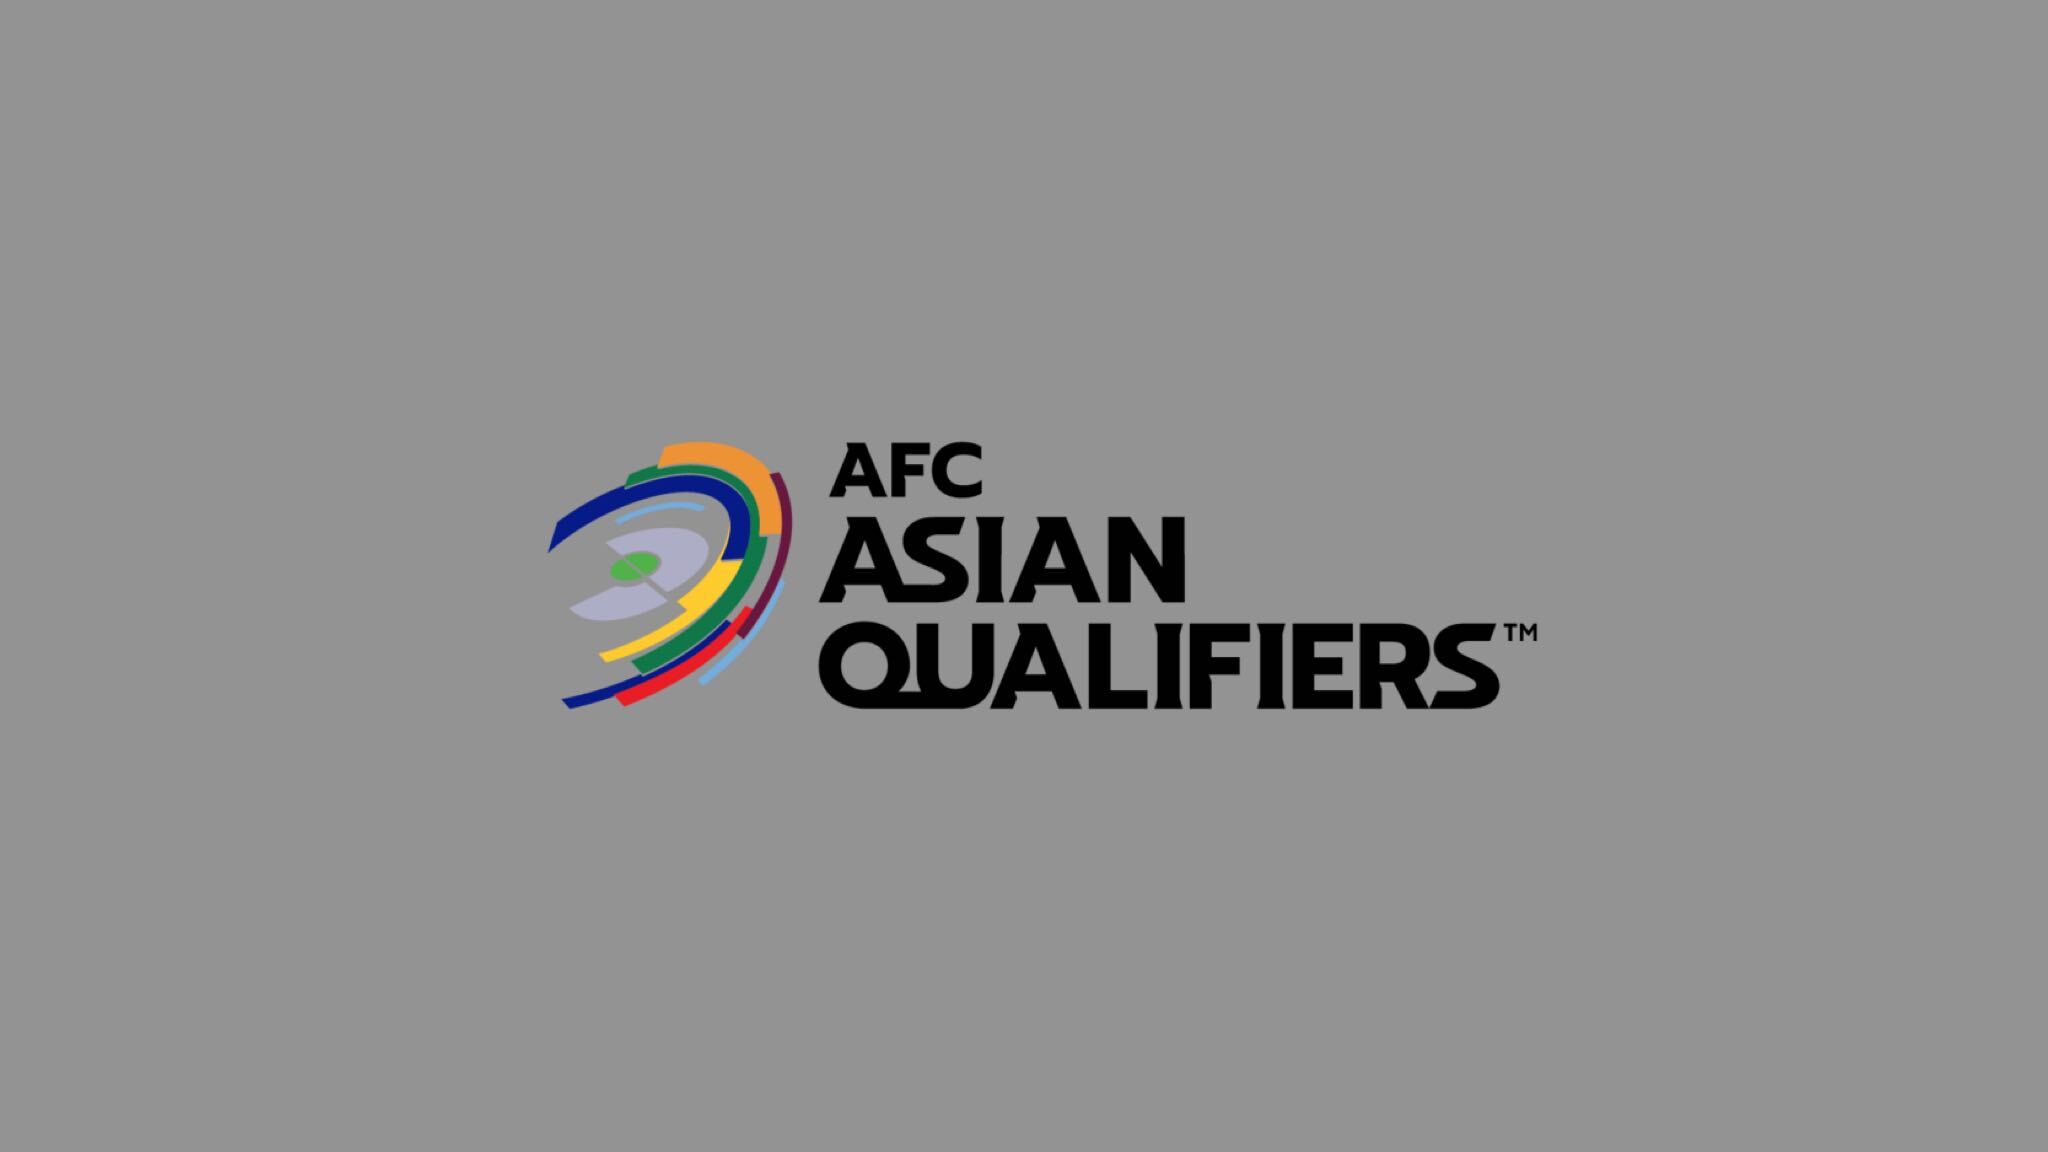 Asian qualifiers